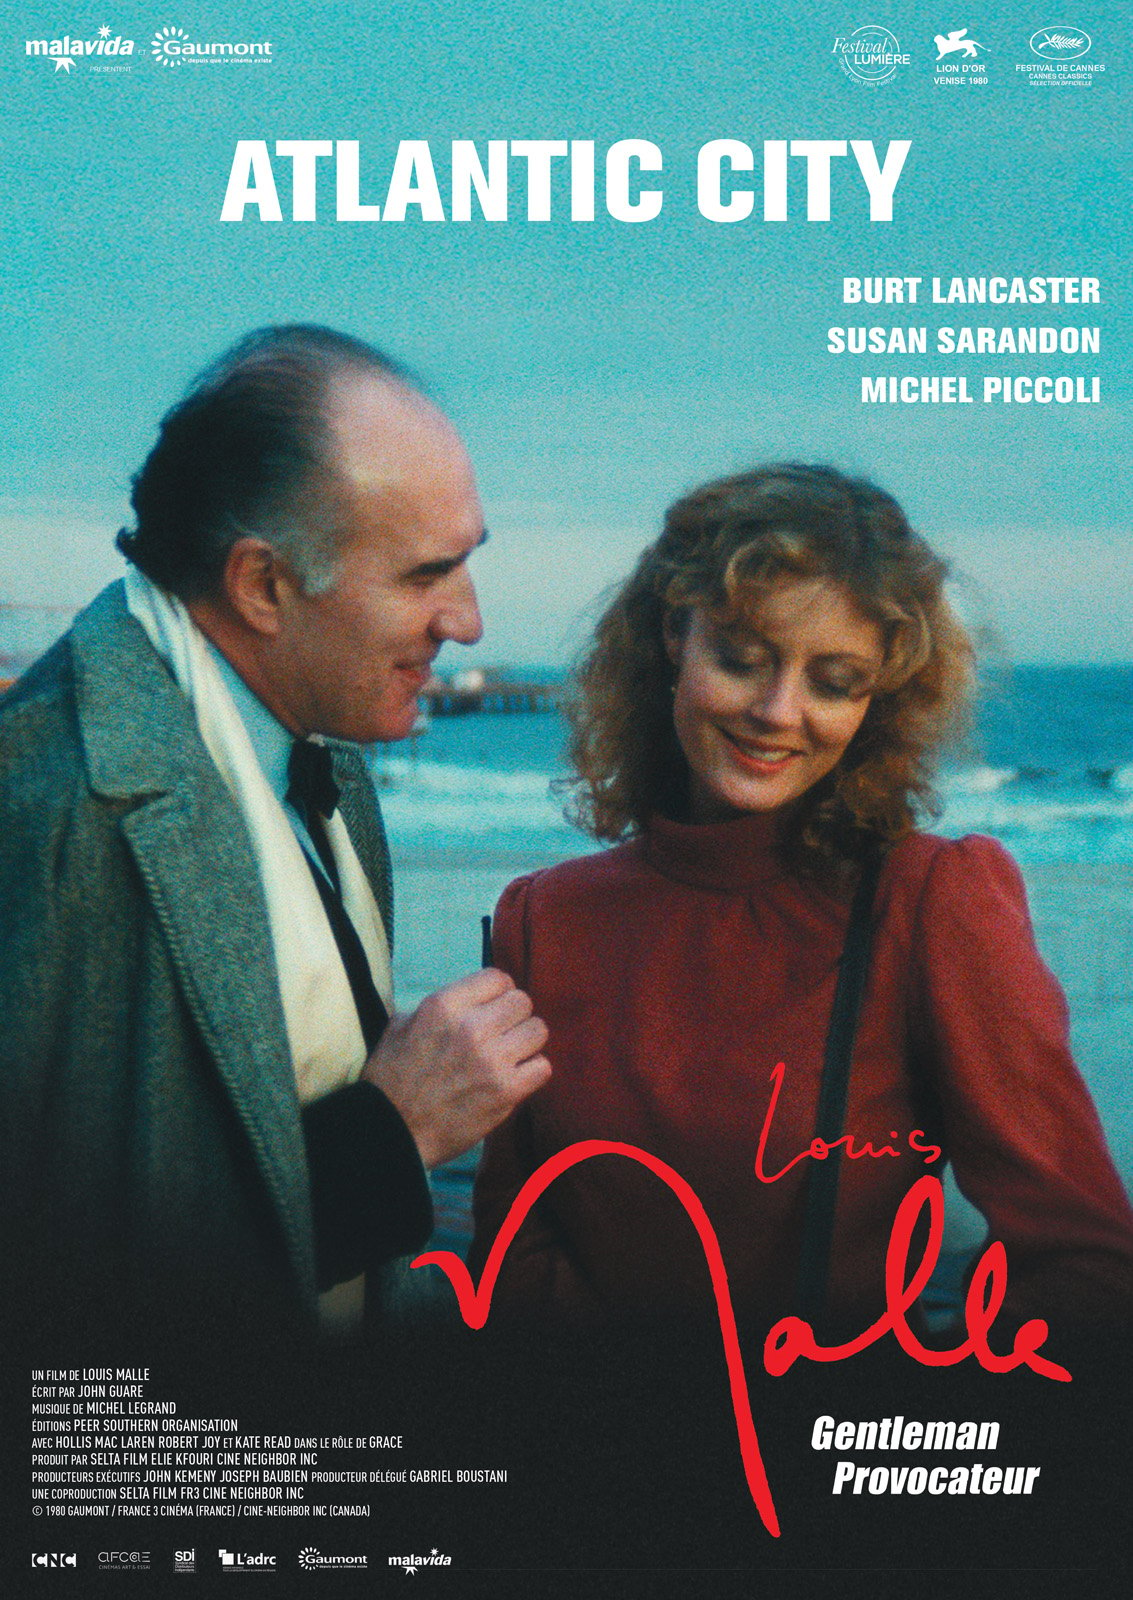 The Louis Malle Blu-ray Collection Dated